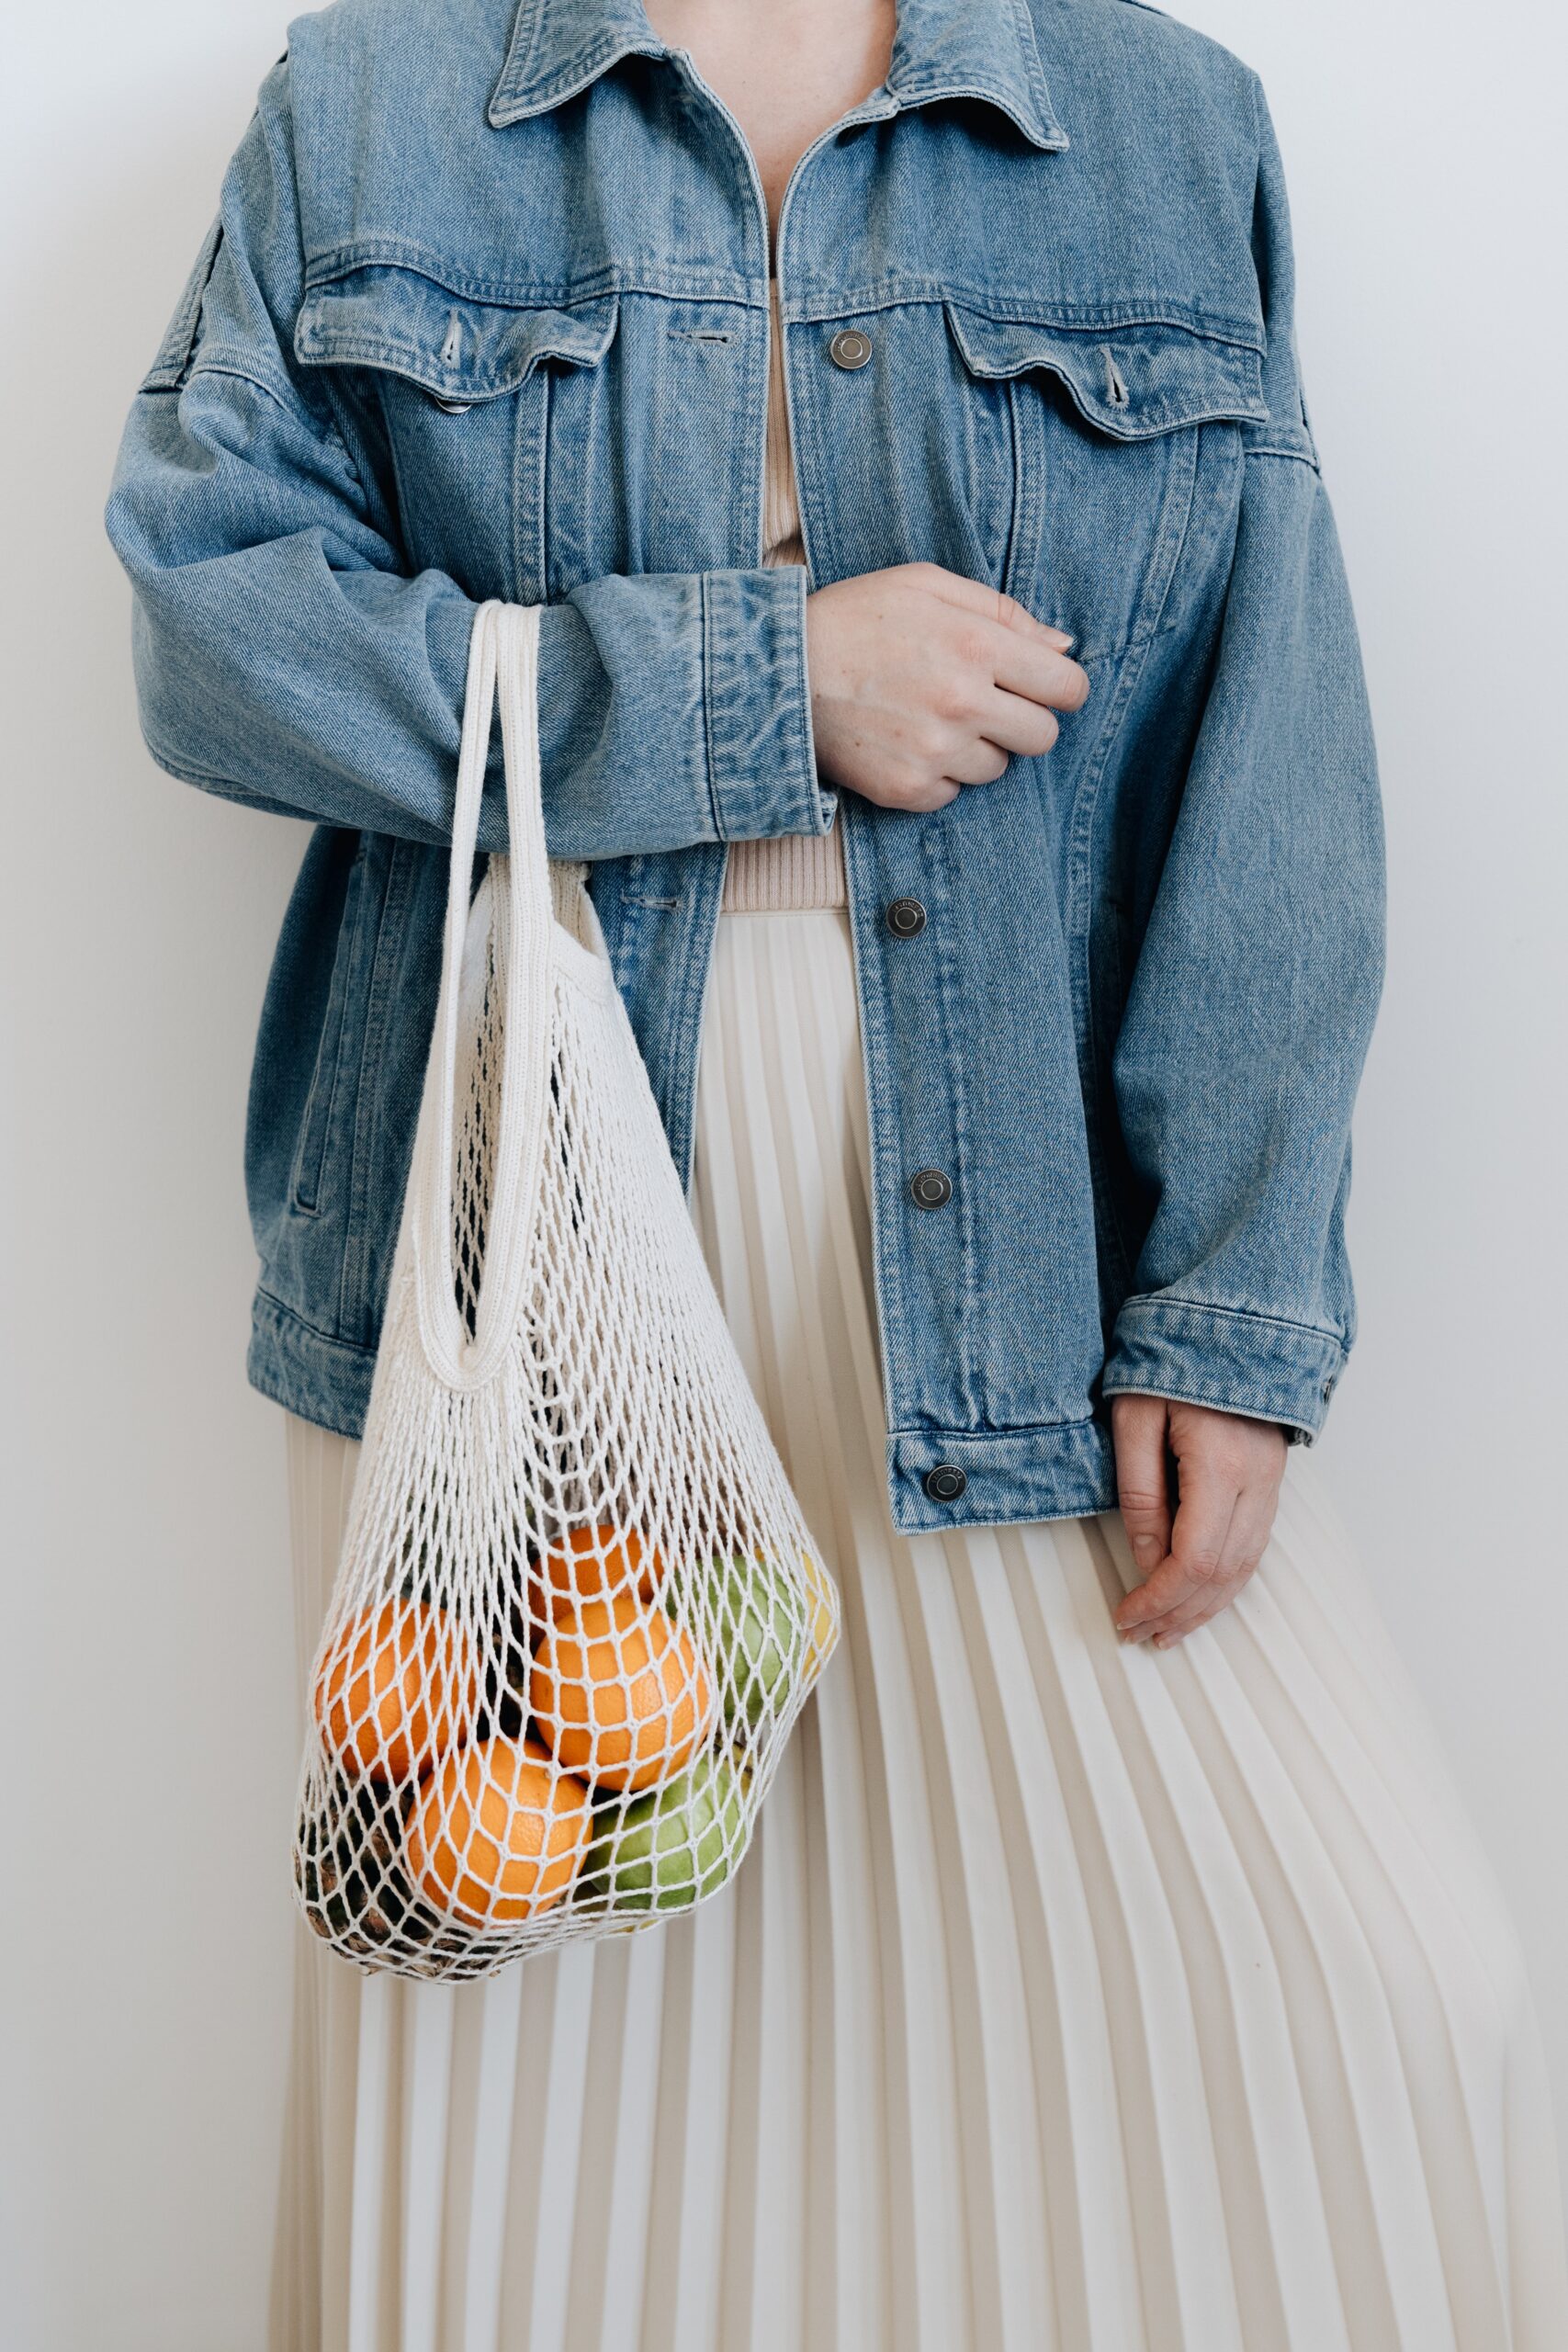 Person wearing a denim jacket holding a reusable bag with fruits